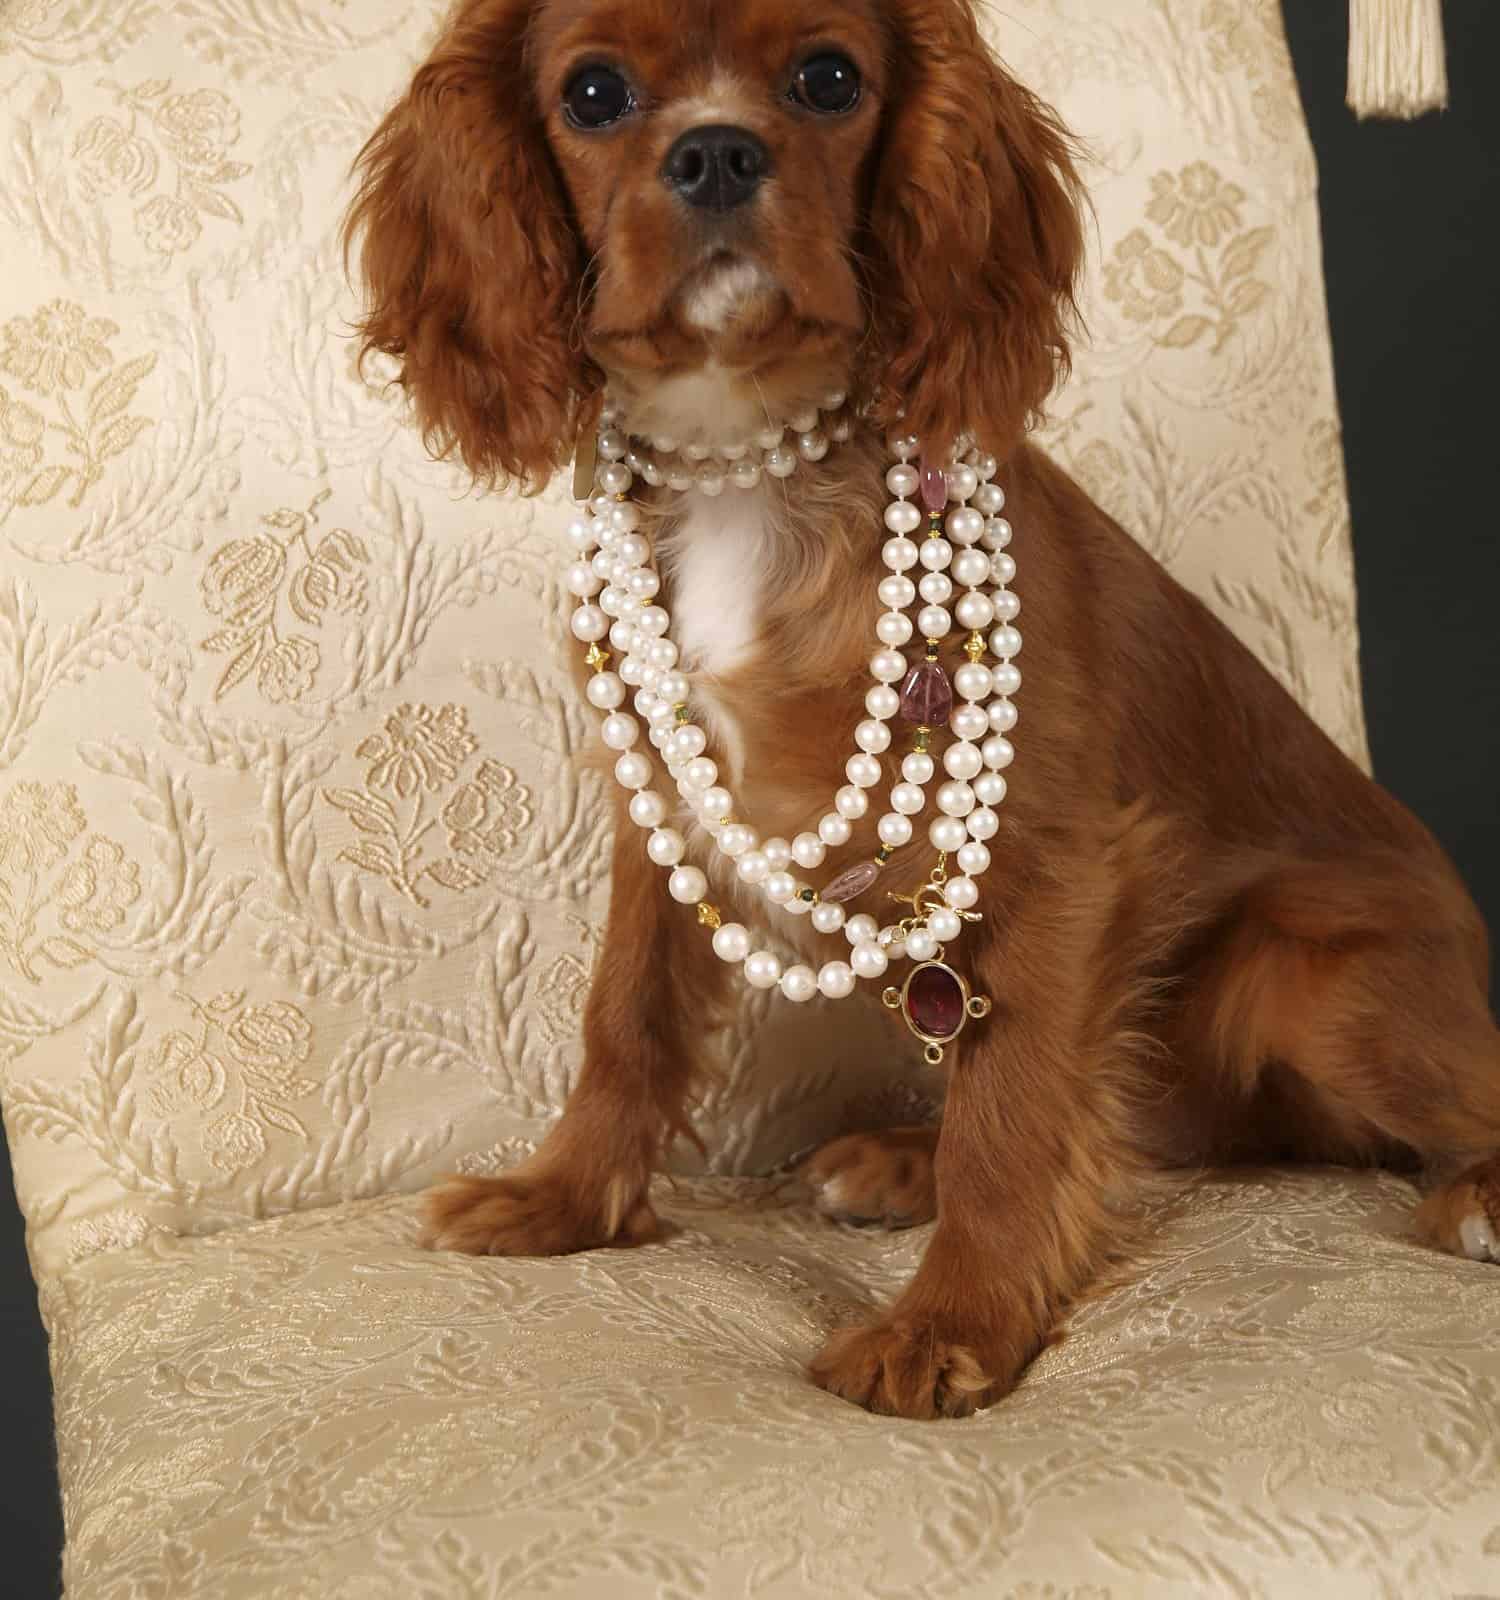 Stock photo of a King Charles Cavalier puppy wearing strings of pearls